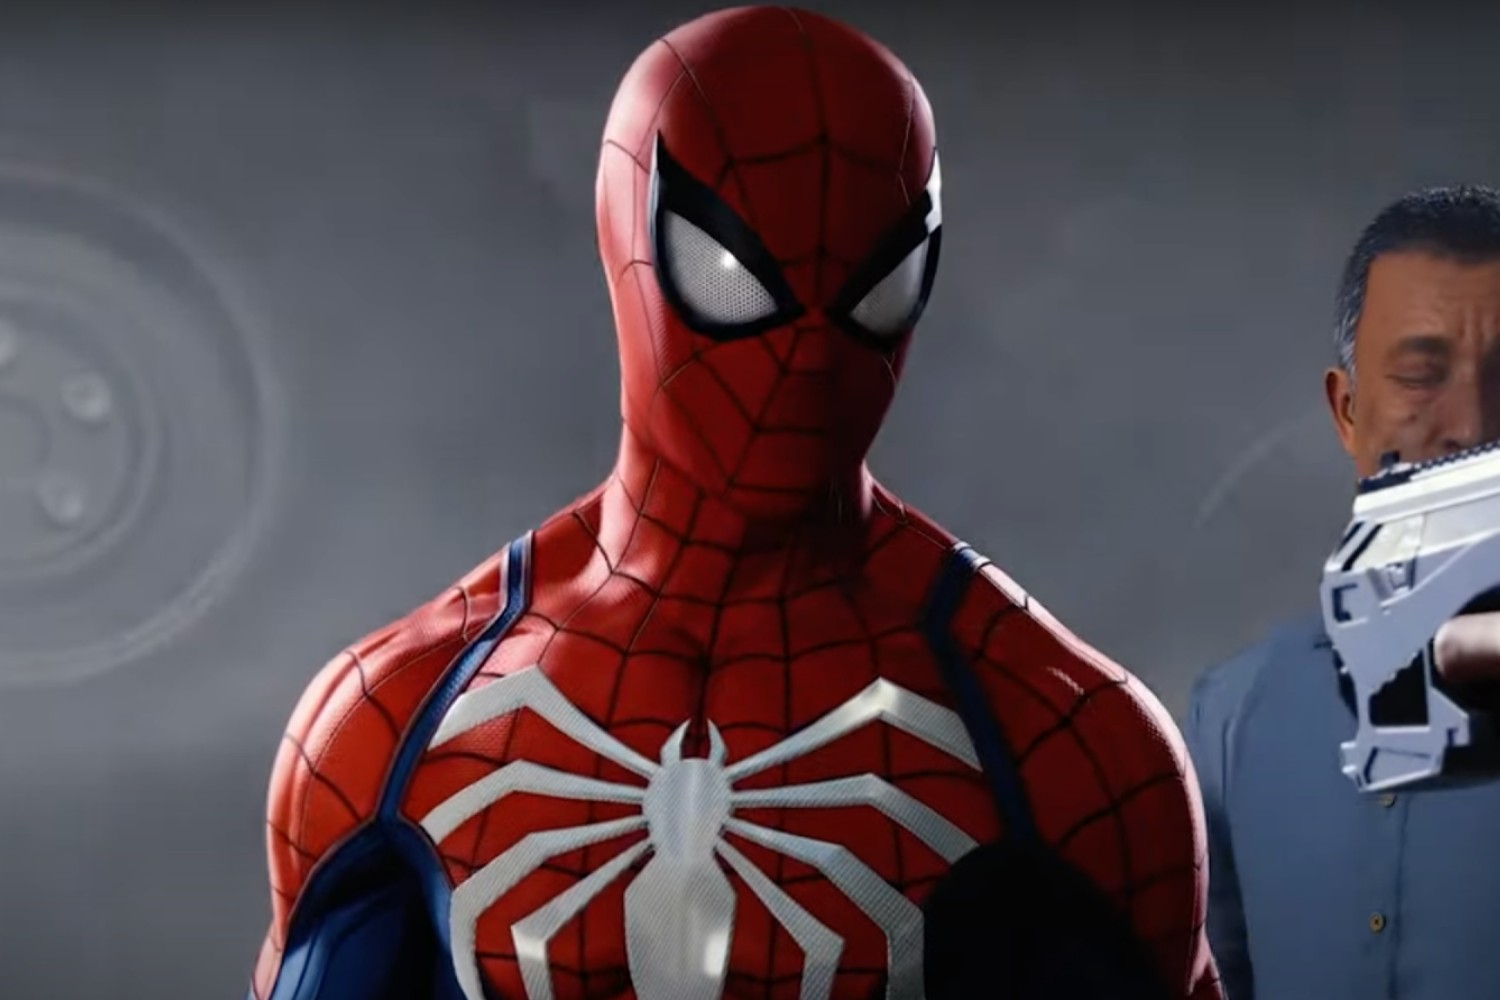 Spider-Man: Remastered PC has a launch date! Here is where to buy it from